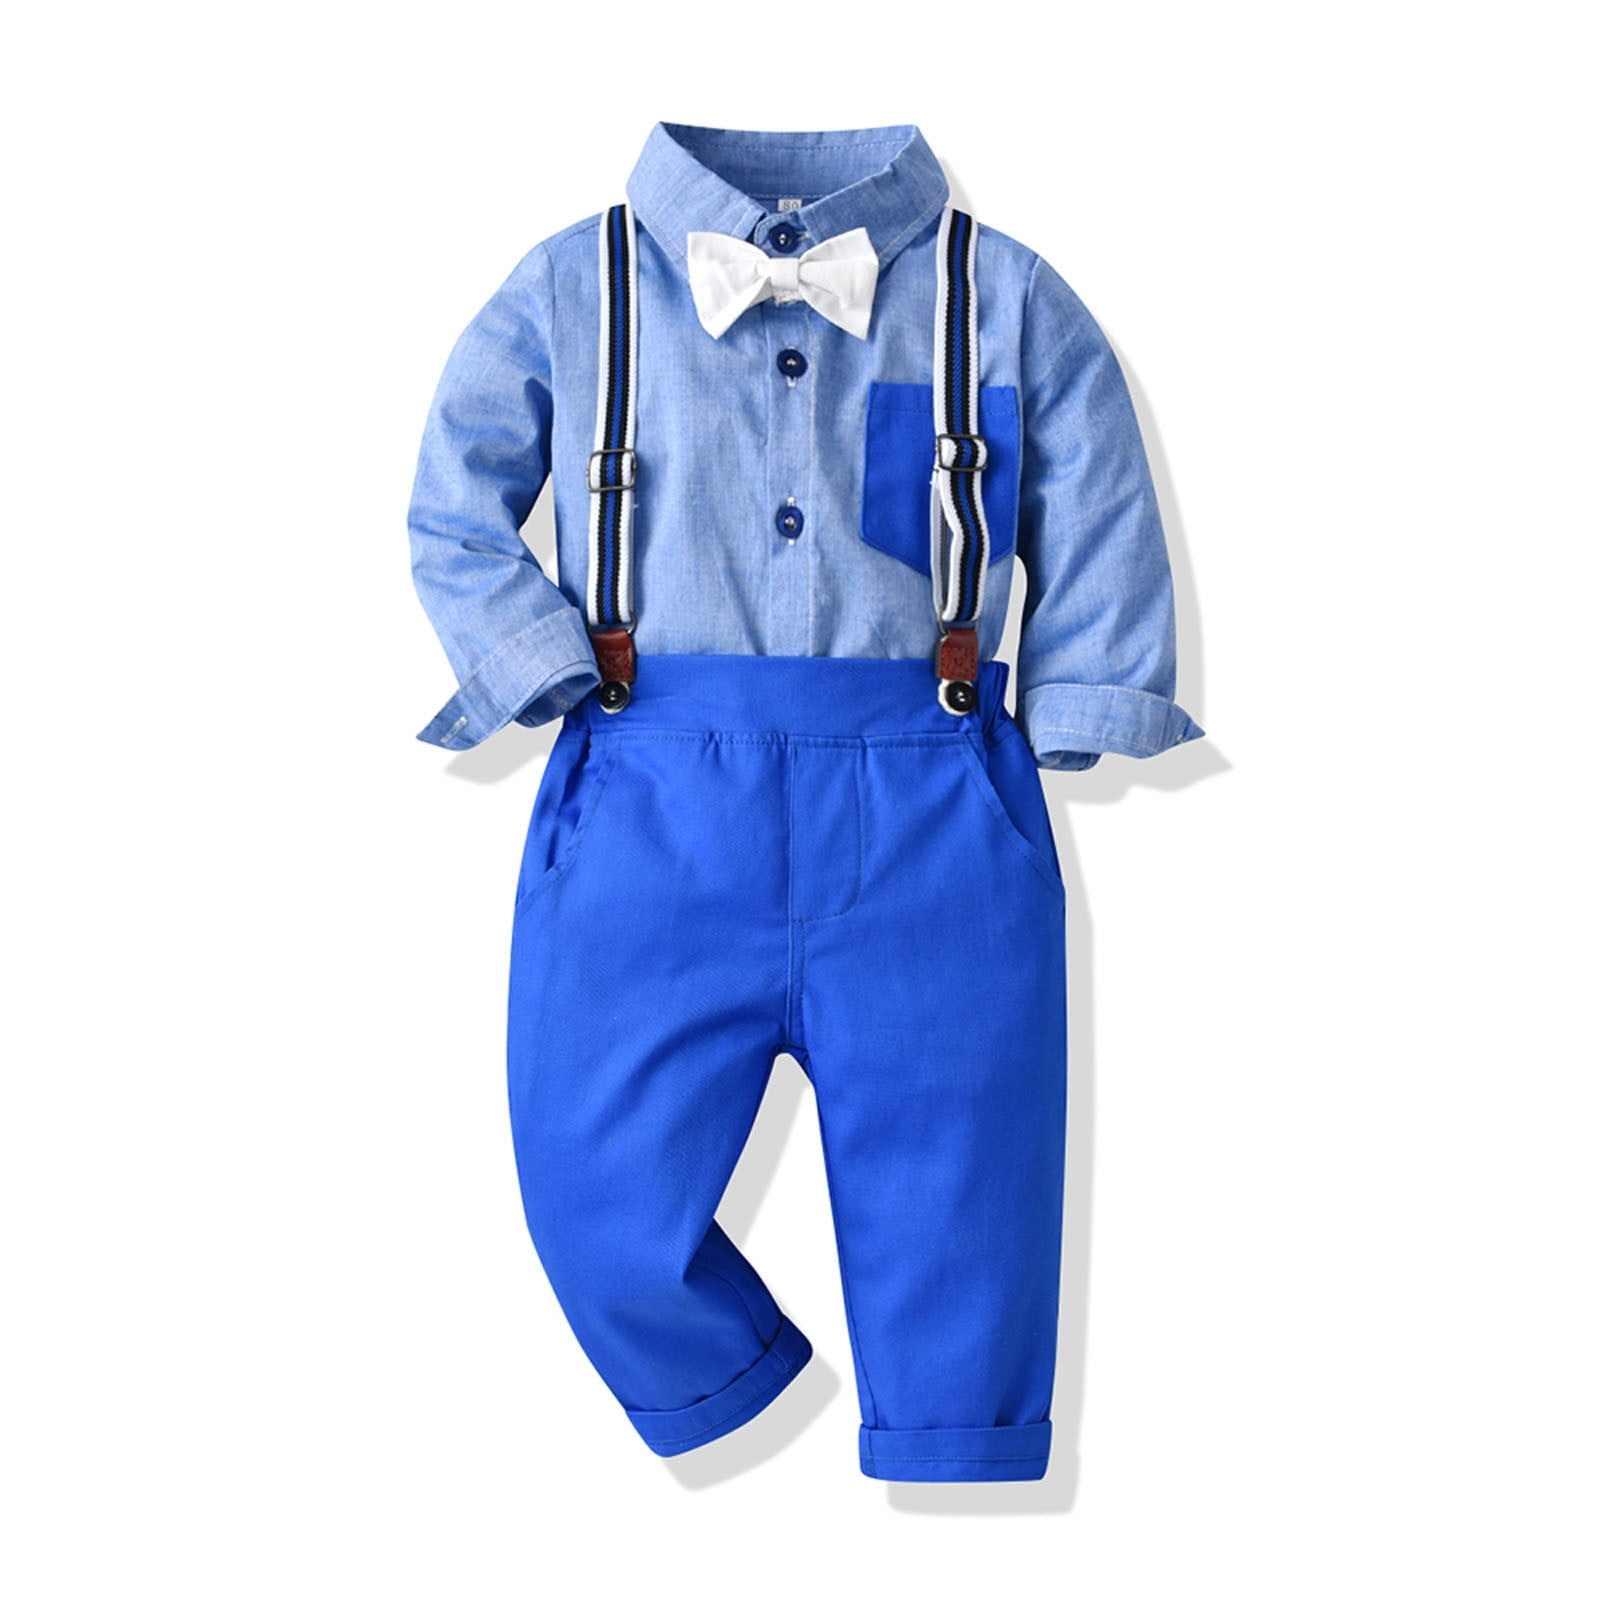 Odeerbi Baby Boys Clothes Baby Outfits Shirts Sets Newborn Autumn ...